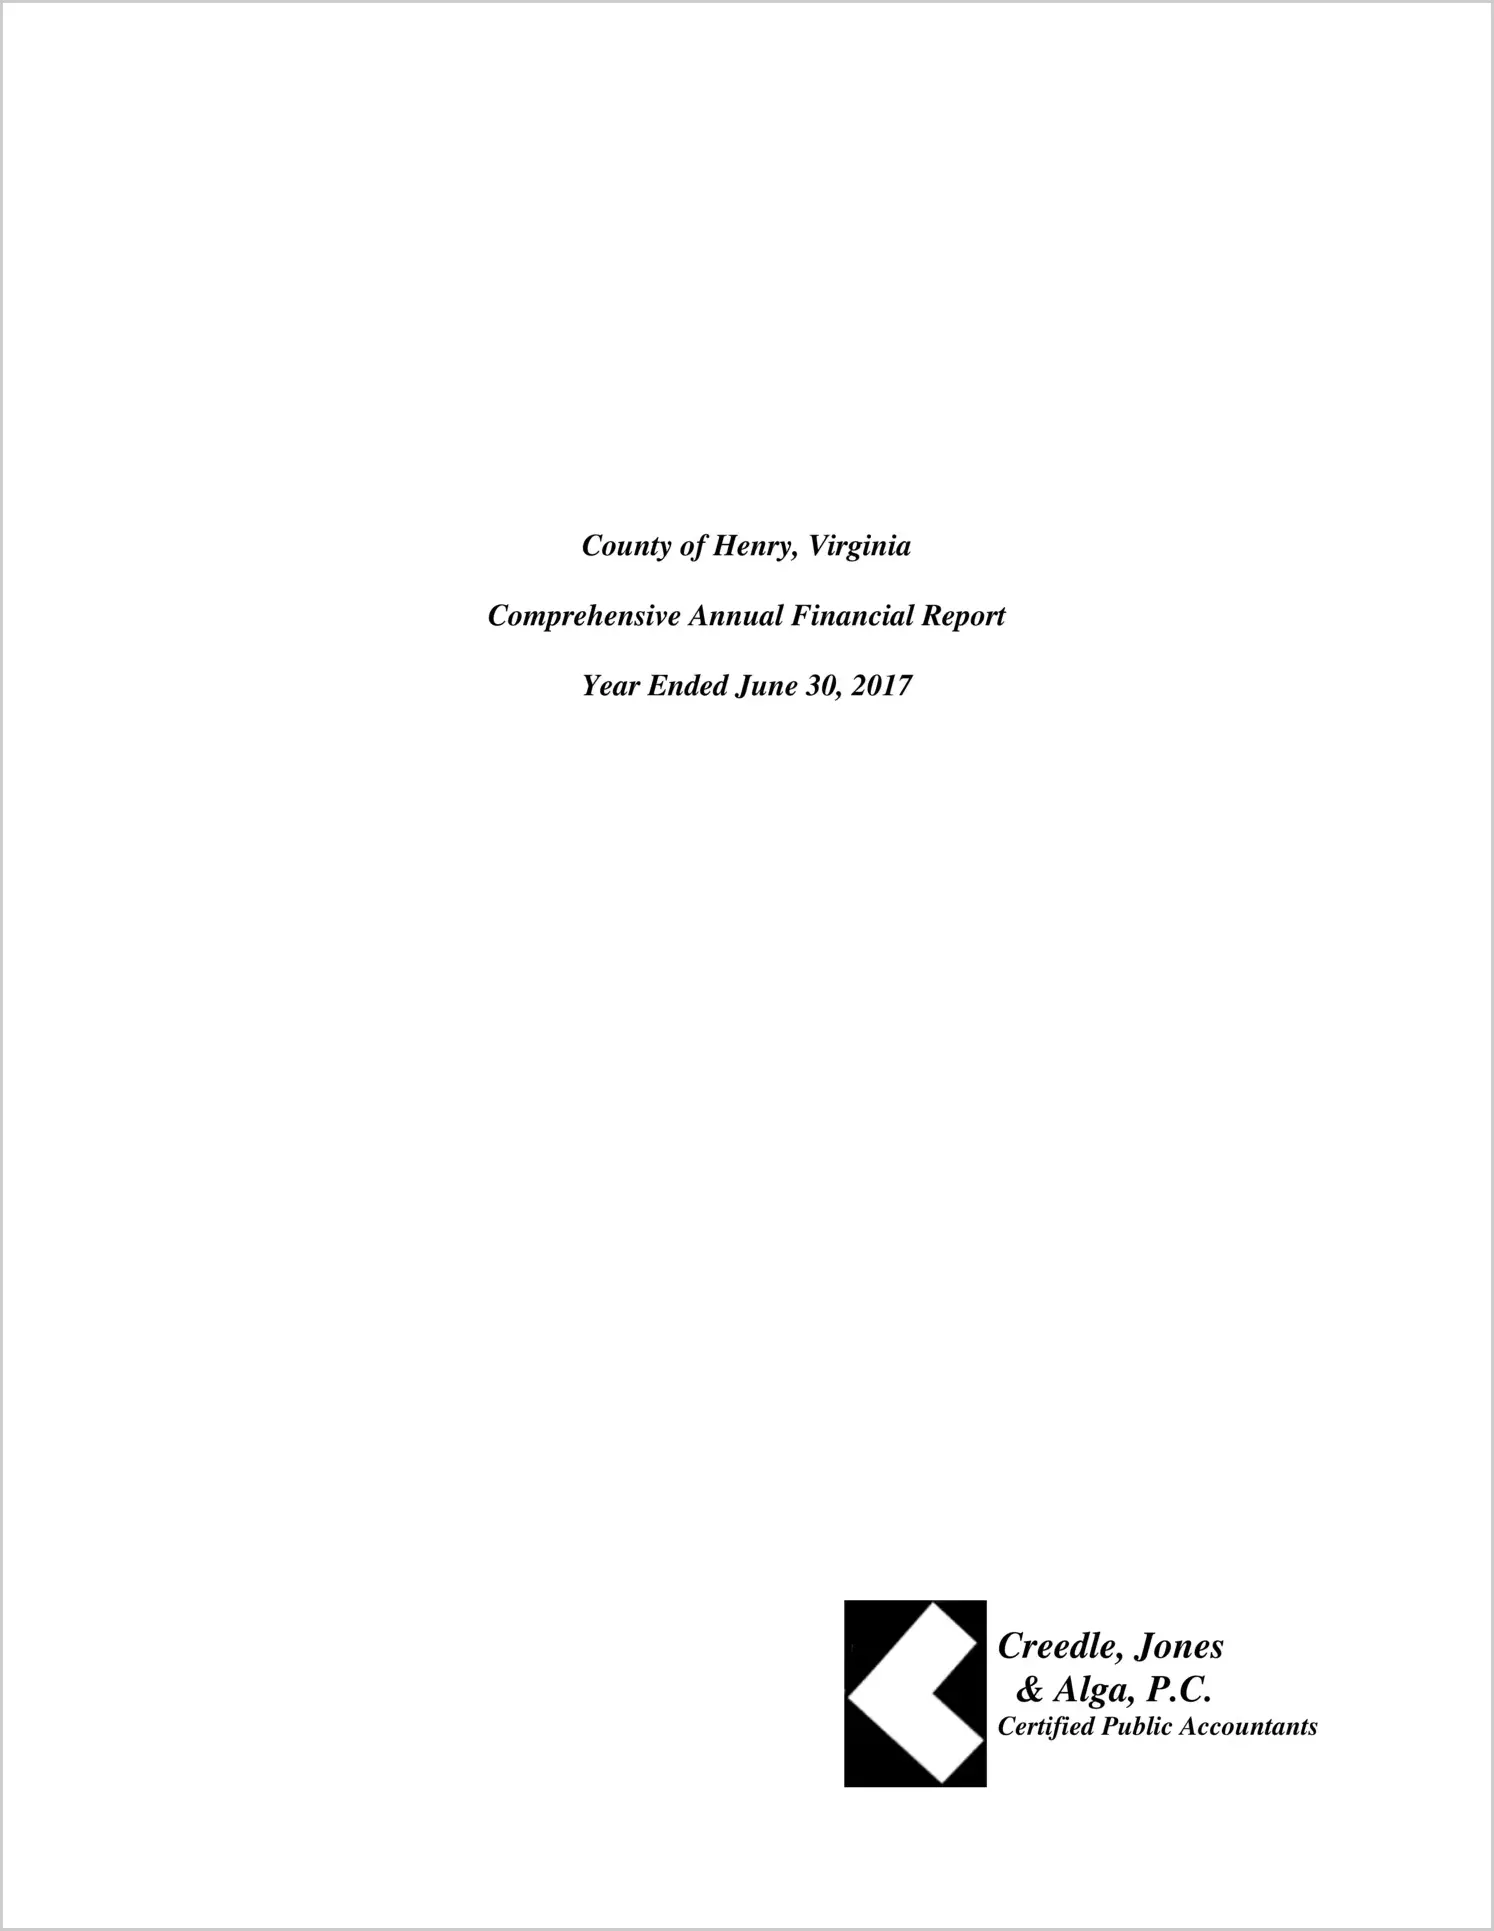 2017 Annual Financial Report for County of Henry